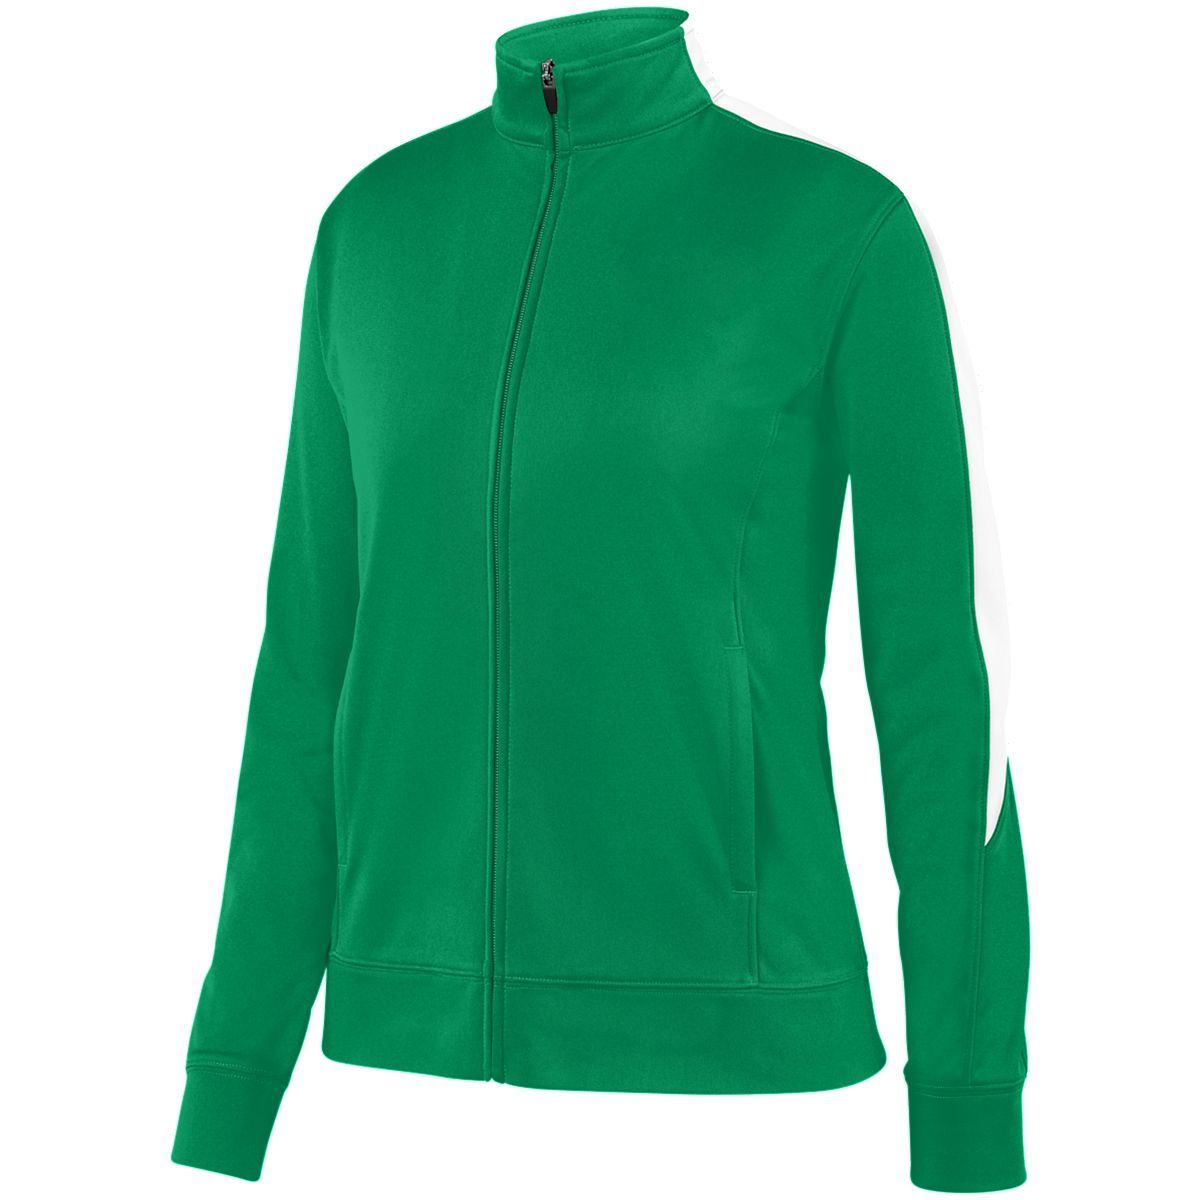 Augusta Sportswear Ladies Medalist Jacket 2.0 in Kelly/White  -Part of the Ladies, Ladies-Jacket, Augusta-Products, Outerwear product lines at KanaleyCreations.com